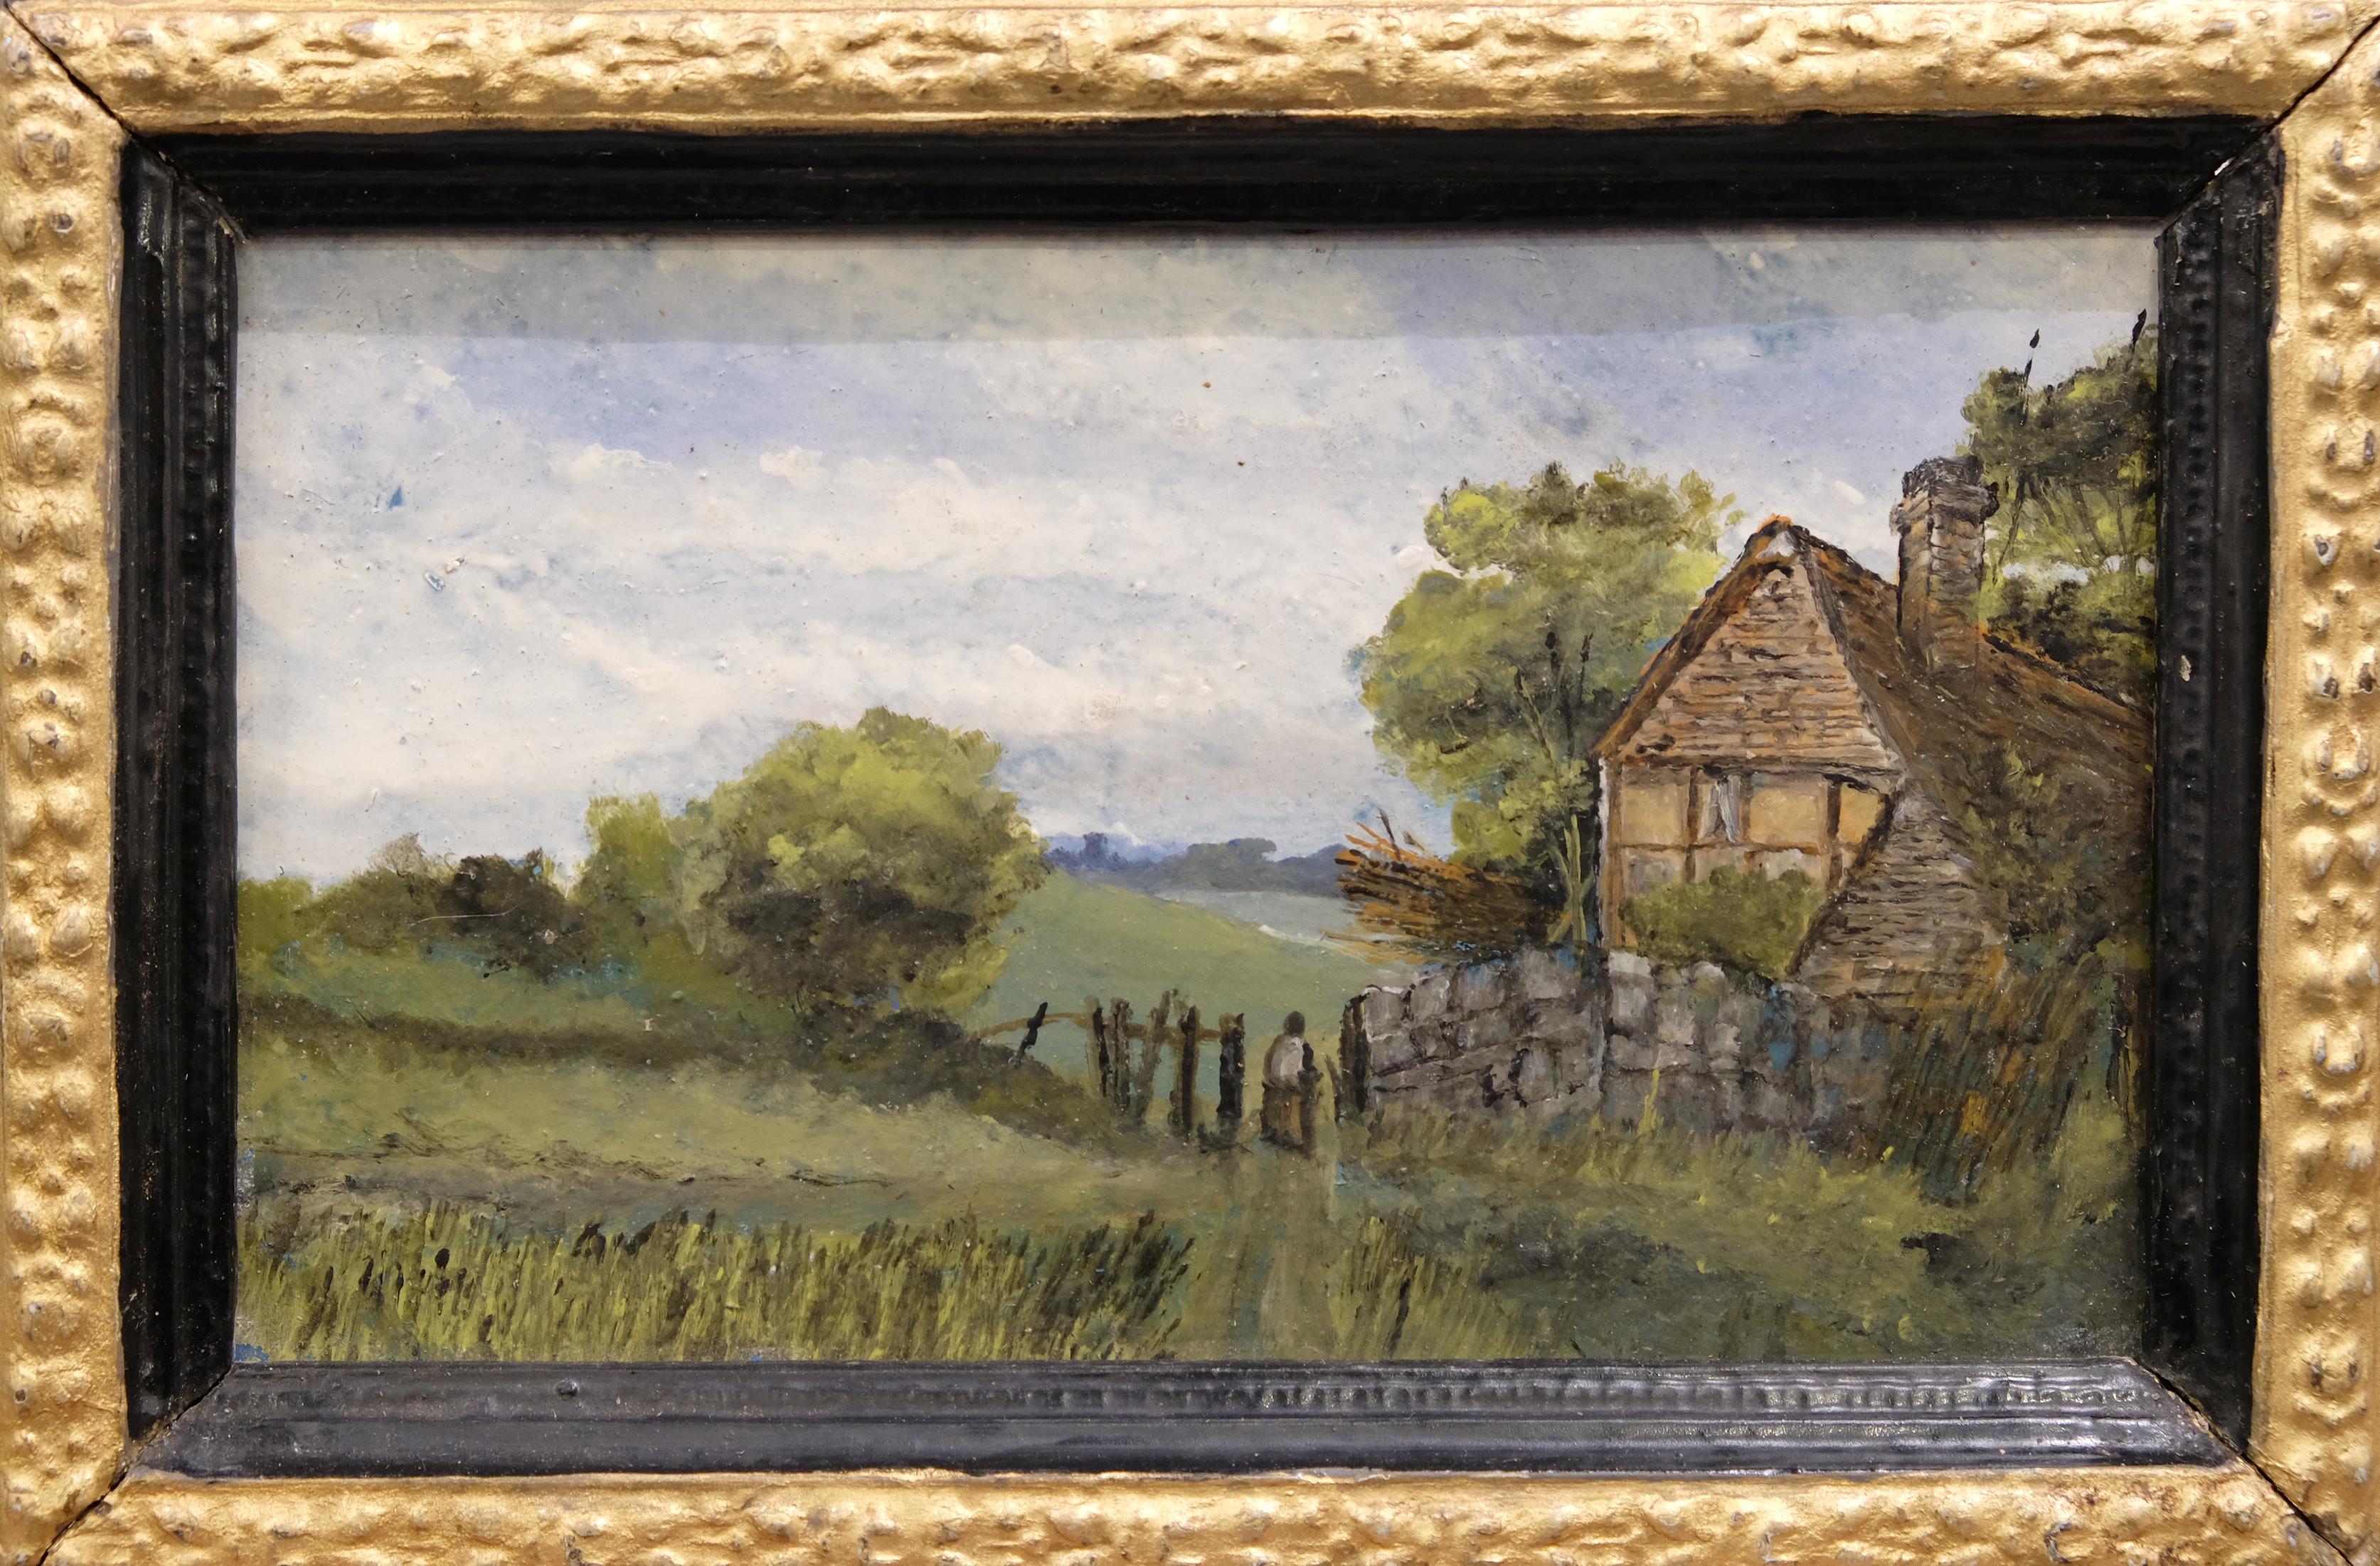 British Country Scene 19th Century Small Oil Painting on Board in Period Ebonized Frame